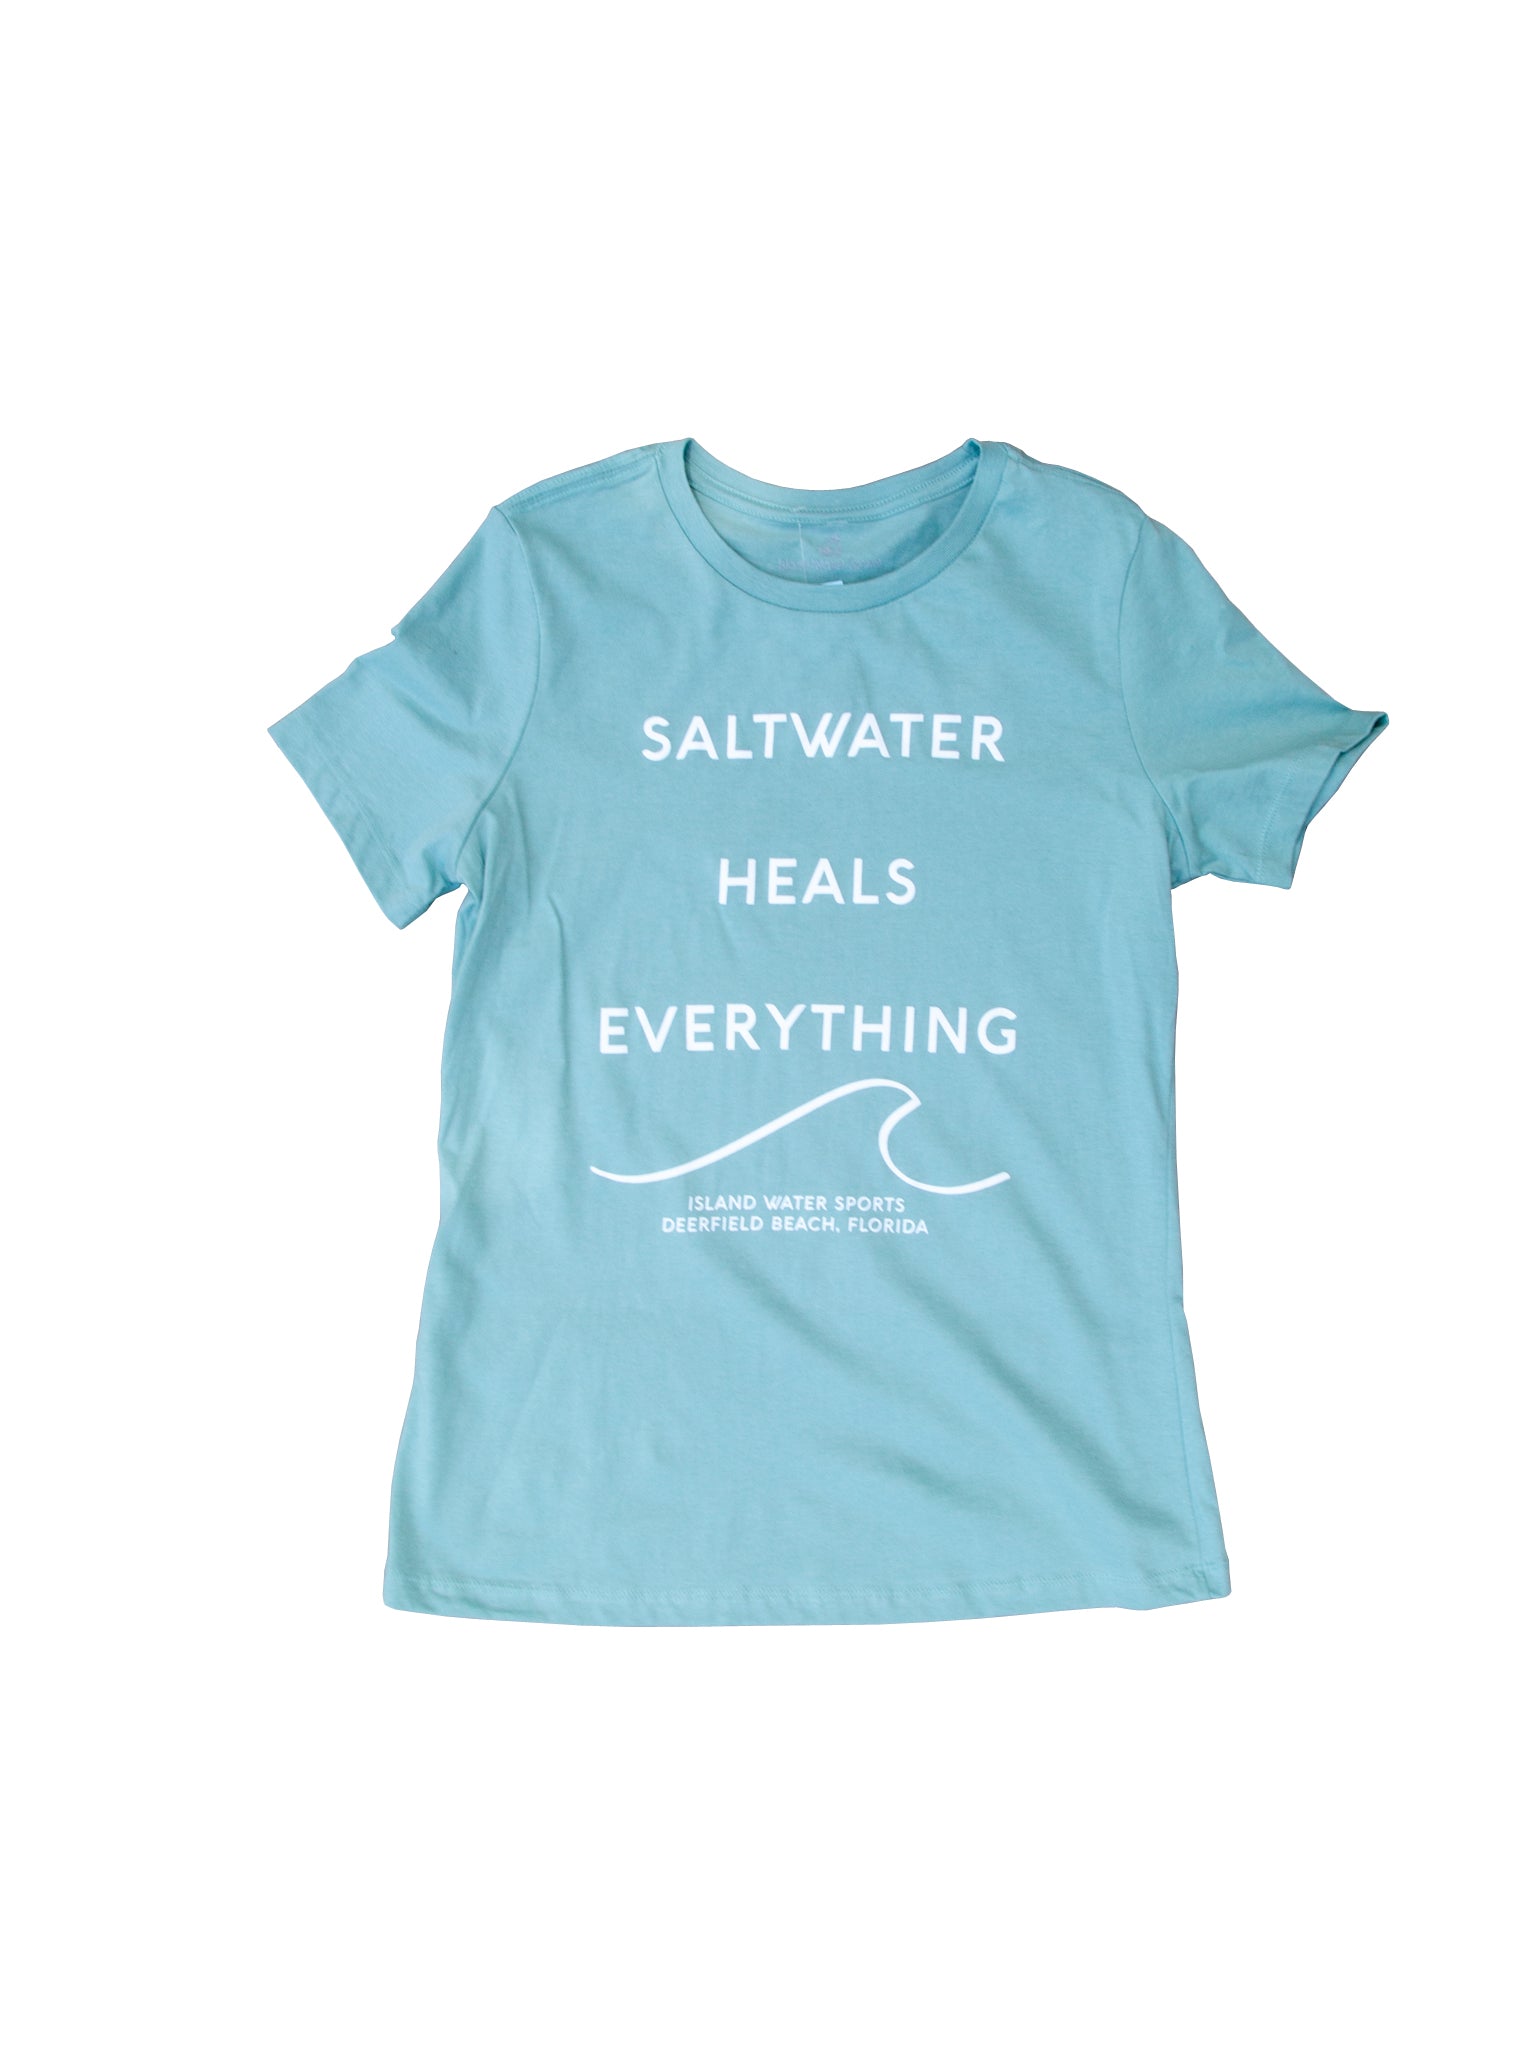 IWS Saltwater Heals Everything Relaxed S/S Tee DustyBlue-White M